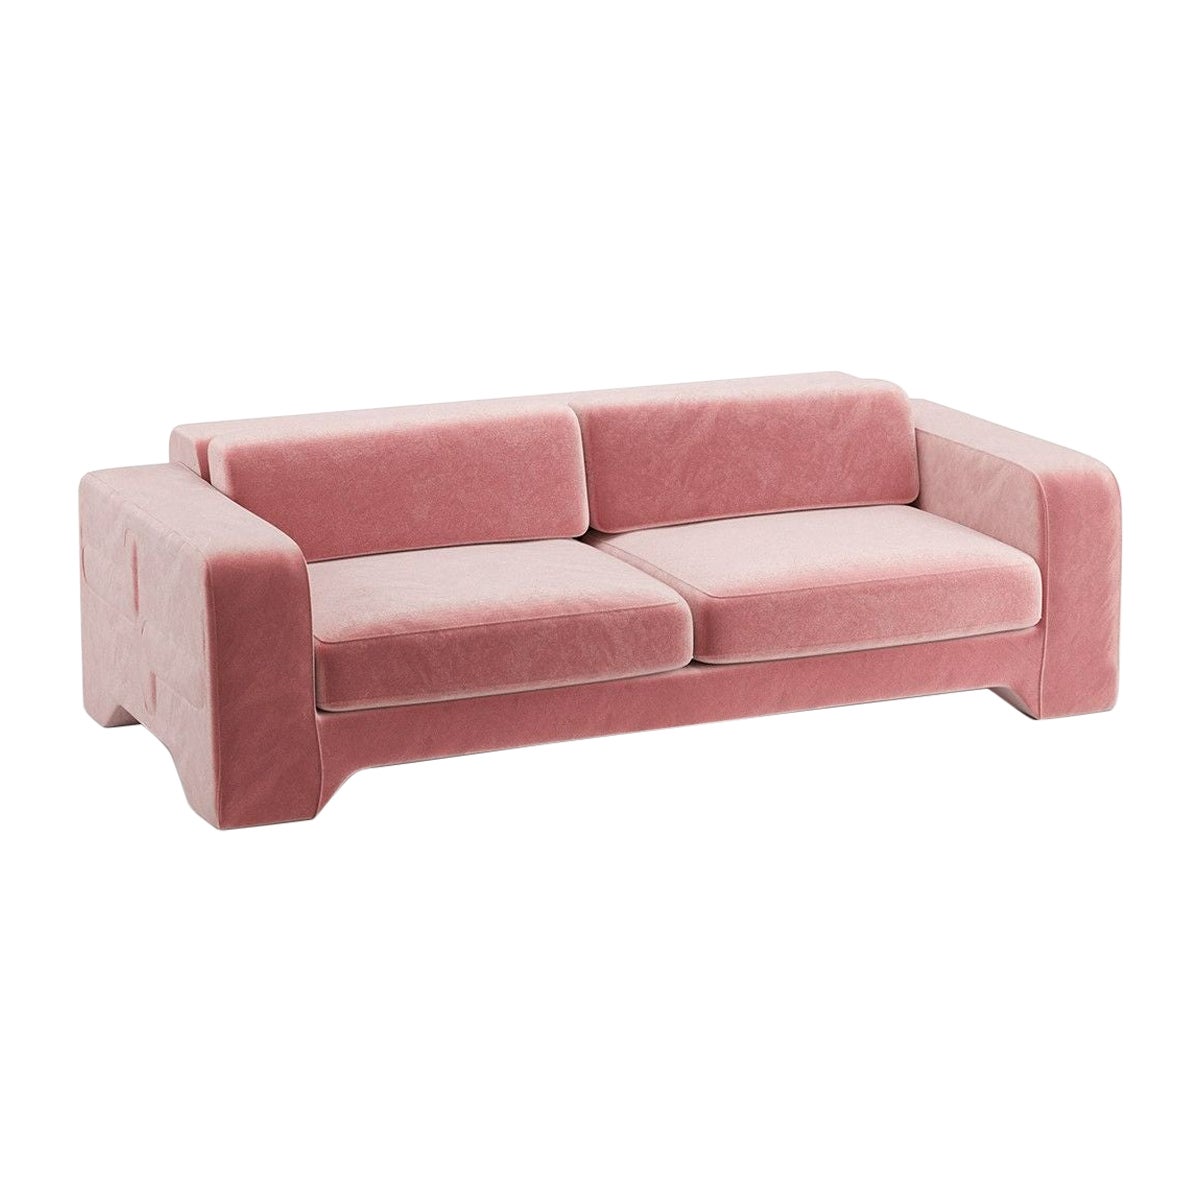 Popus Editions Giovanna 4 Seater Sofa in Pink Verone Velvet Upholstery For Sale